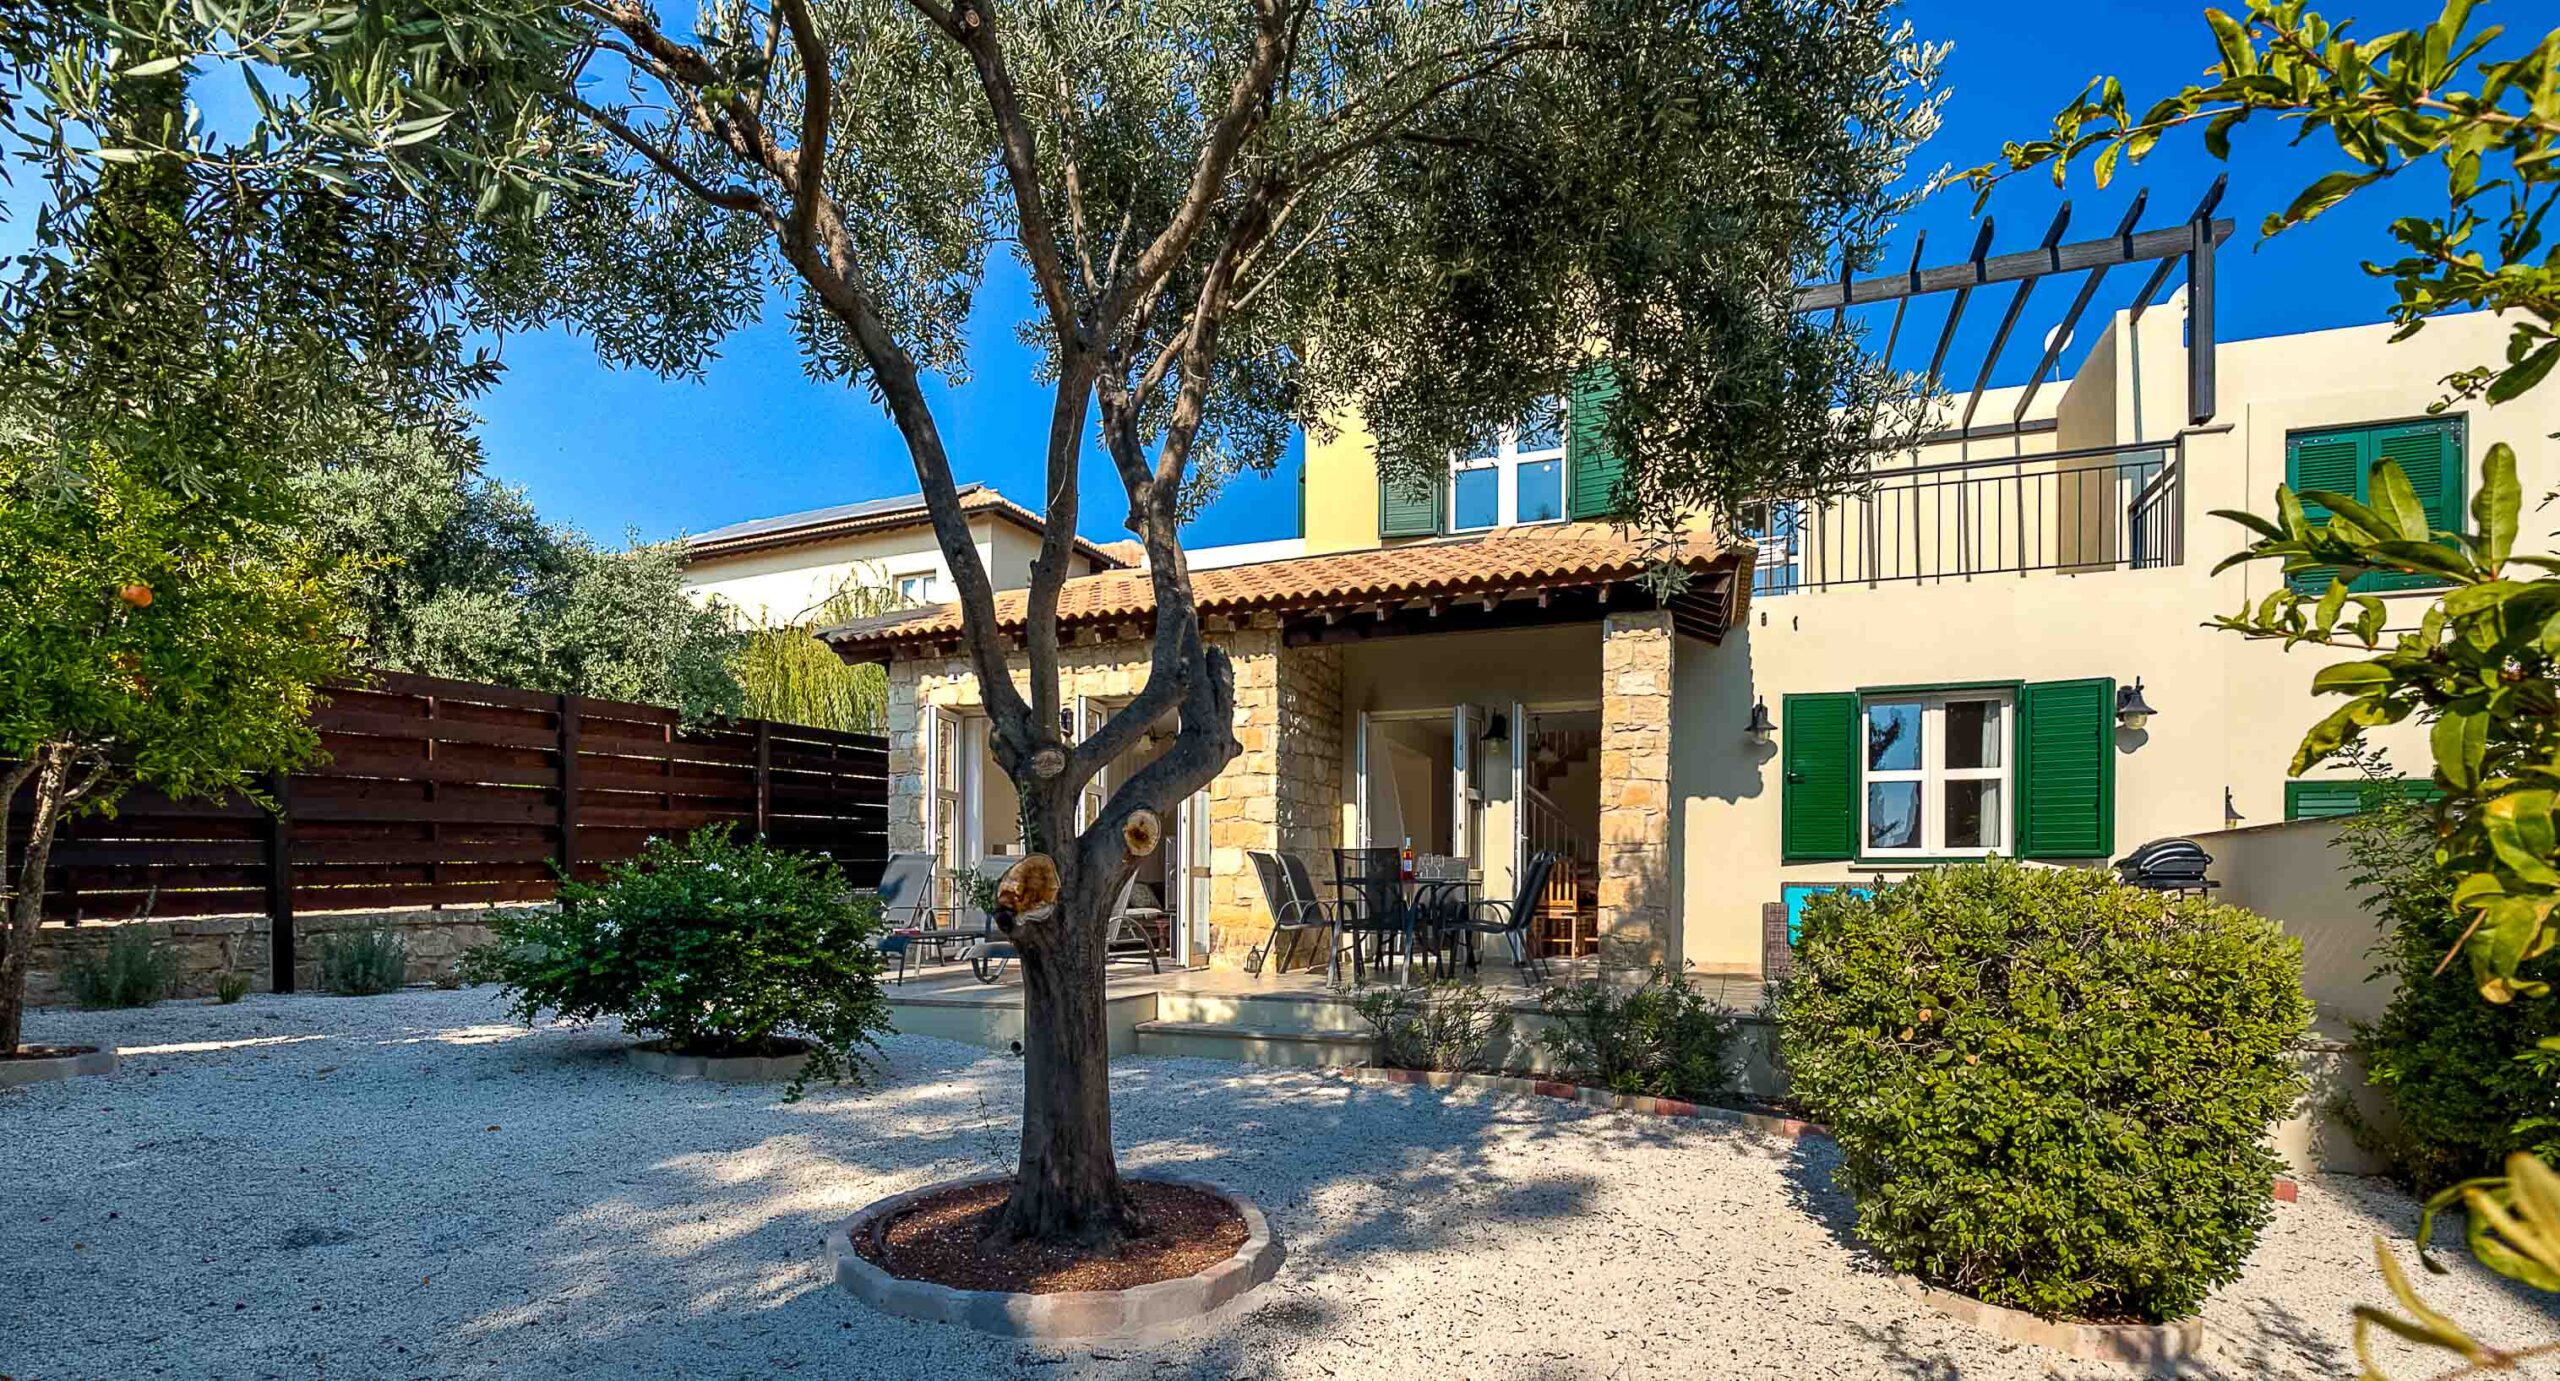 Photo of Junior Villa R1 on Aphrodite Hills - showing the back garden and patio, with olive tree in the centre